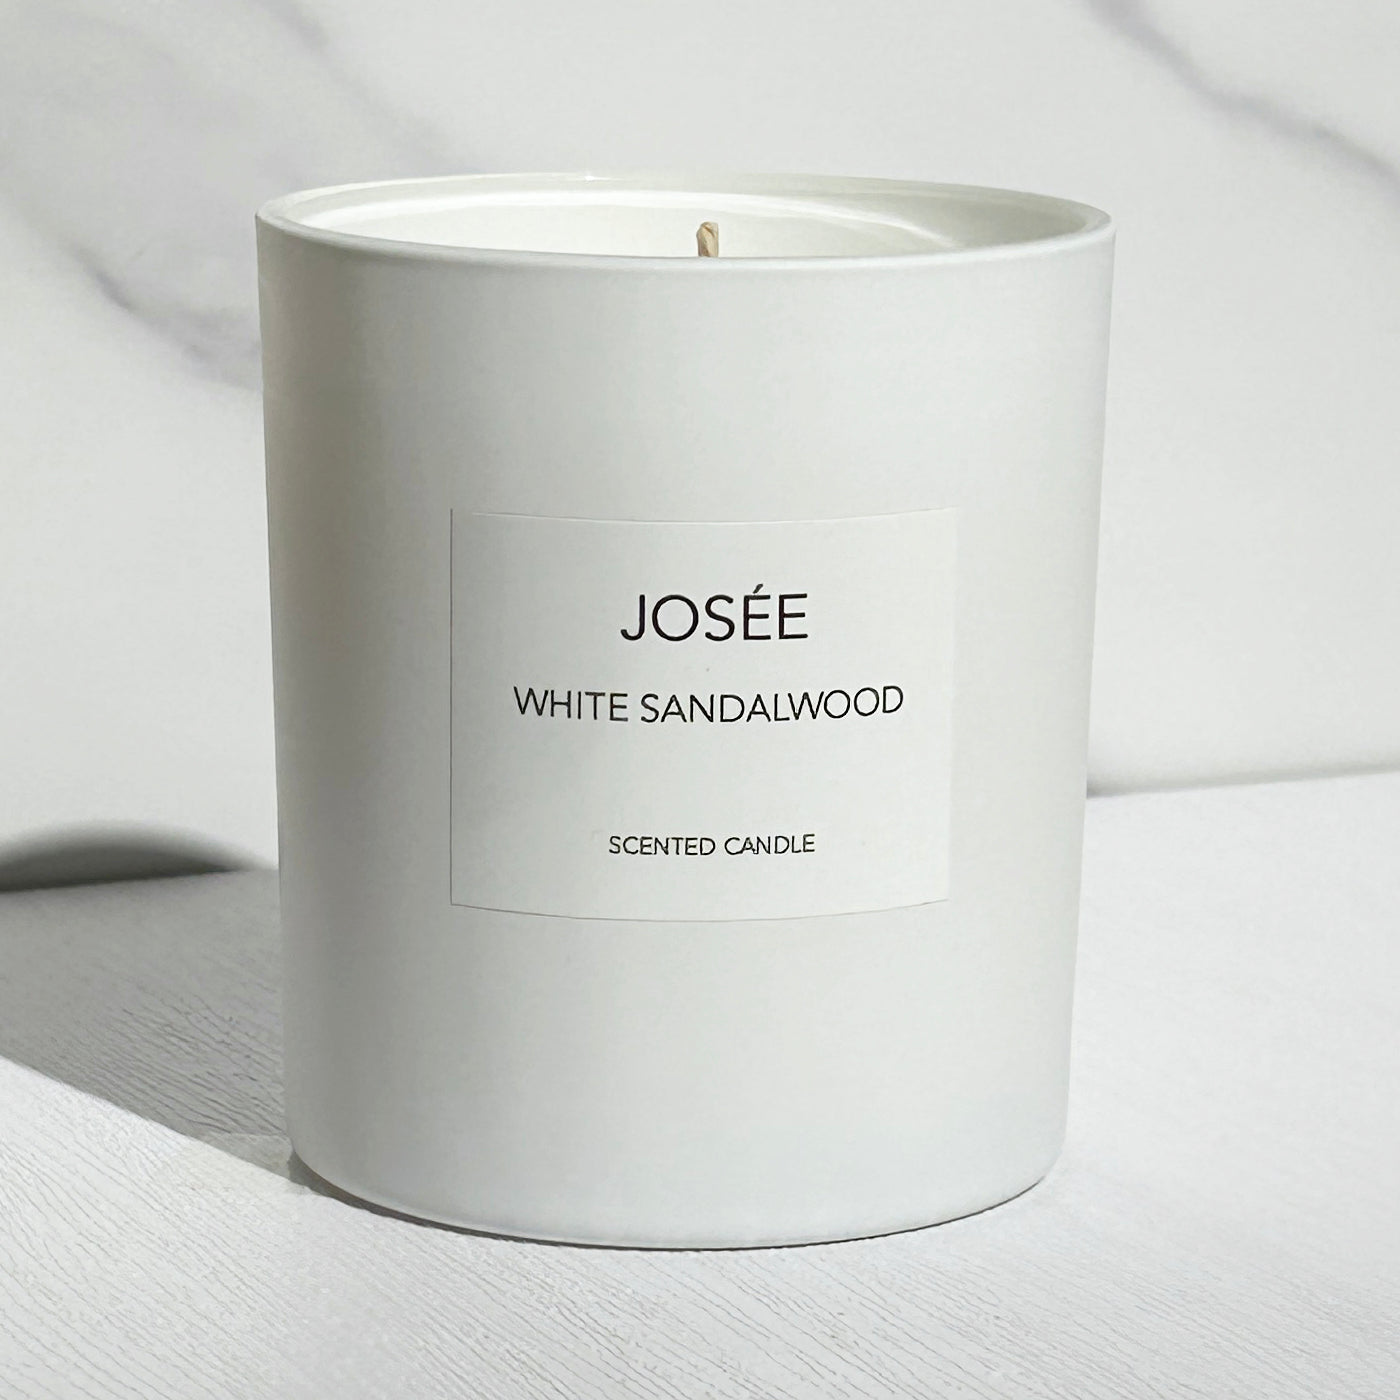 White Sandalwood Scented Candle 220g